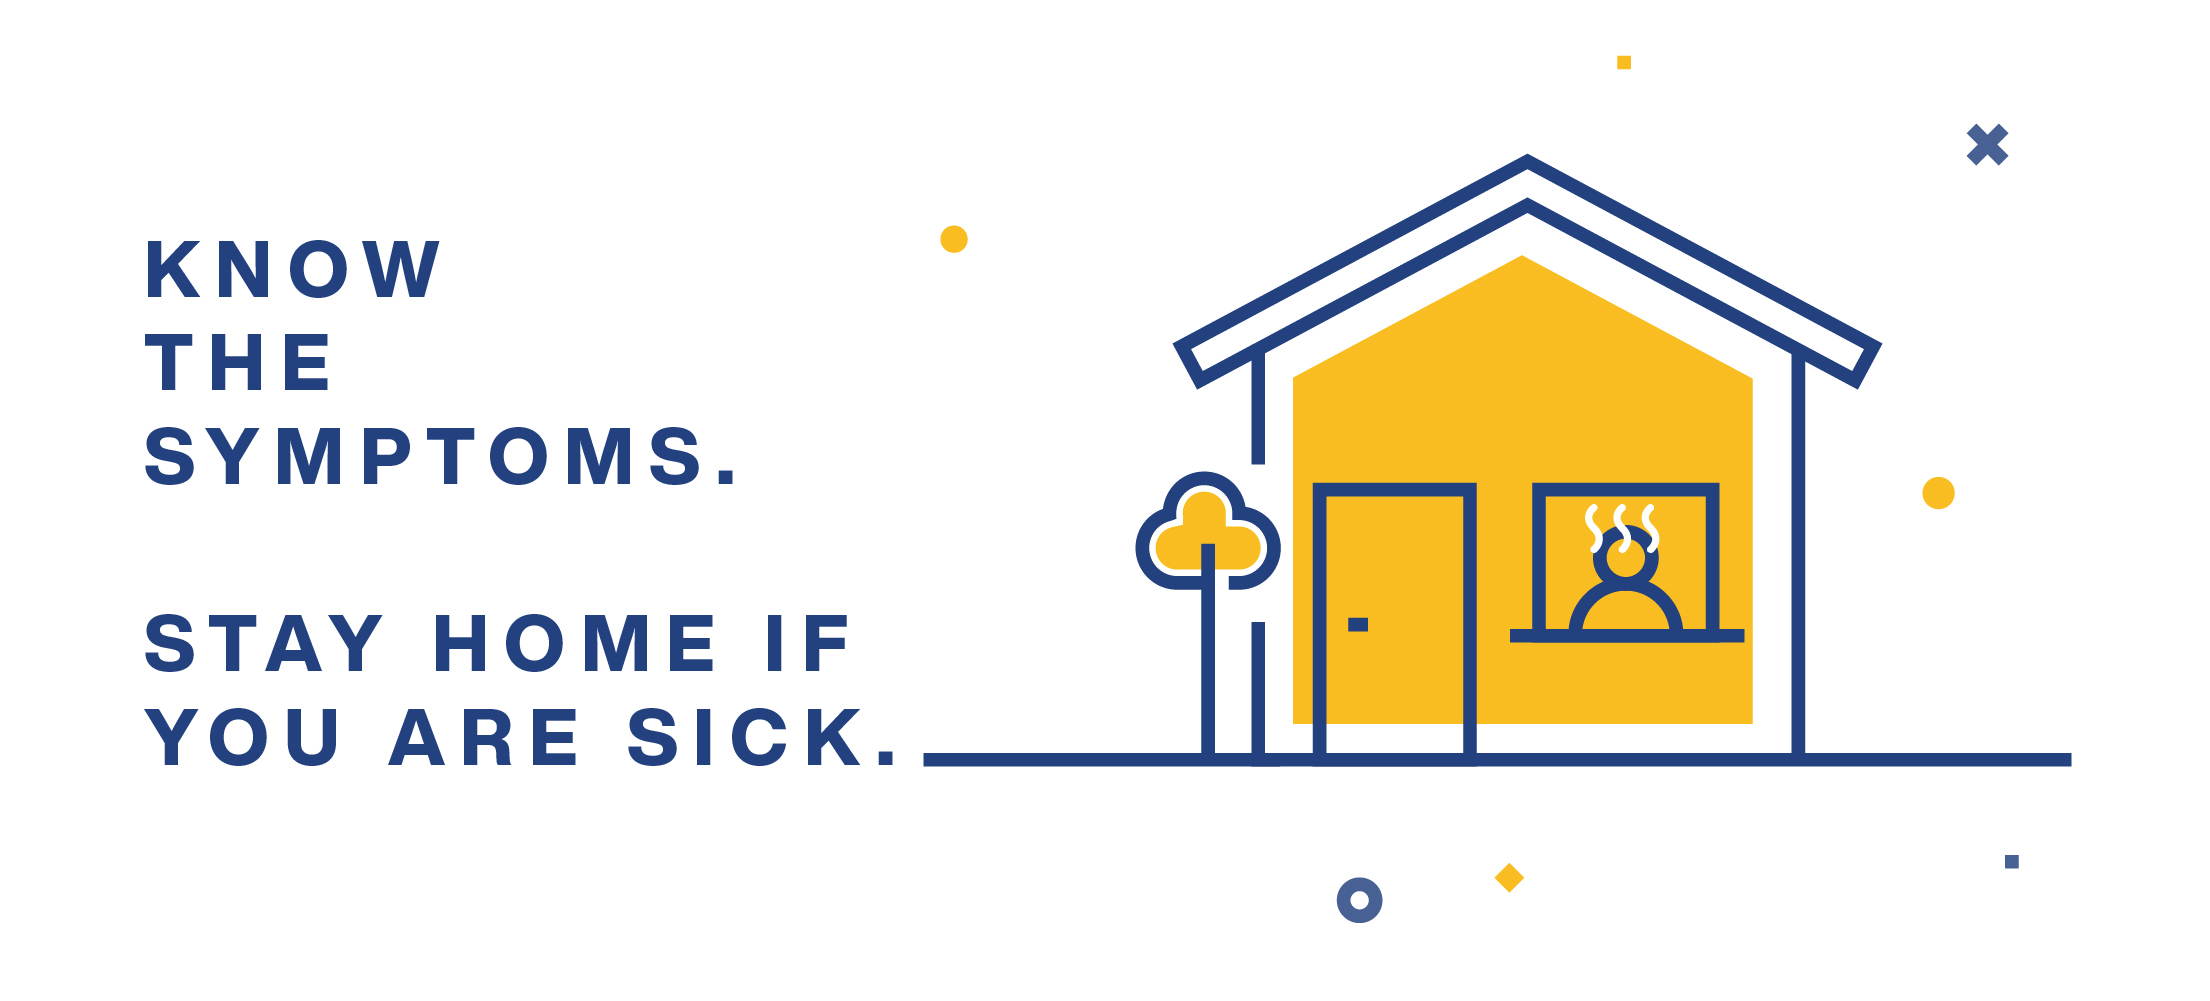 Know the symptoms.  Stay home if you are sick.